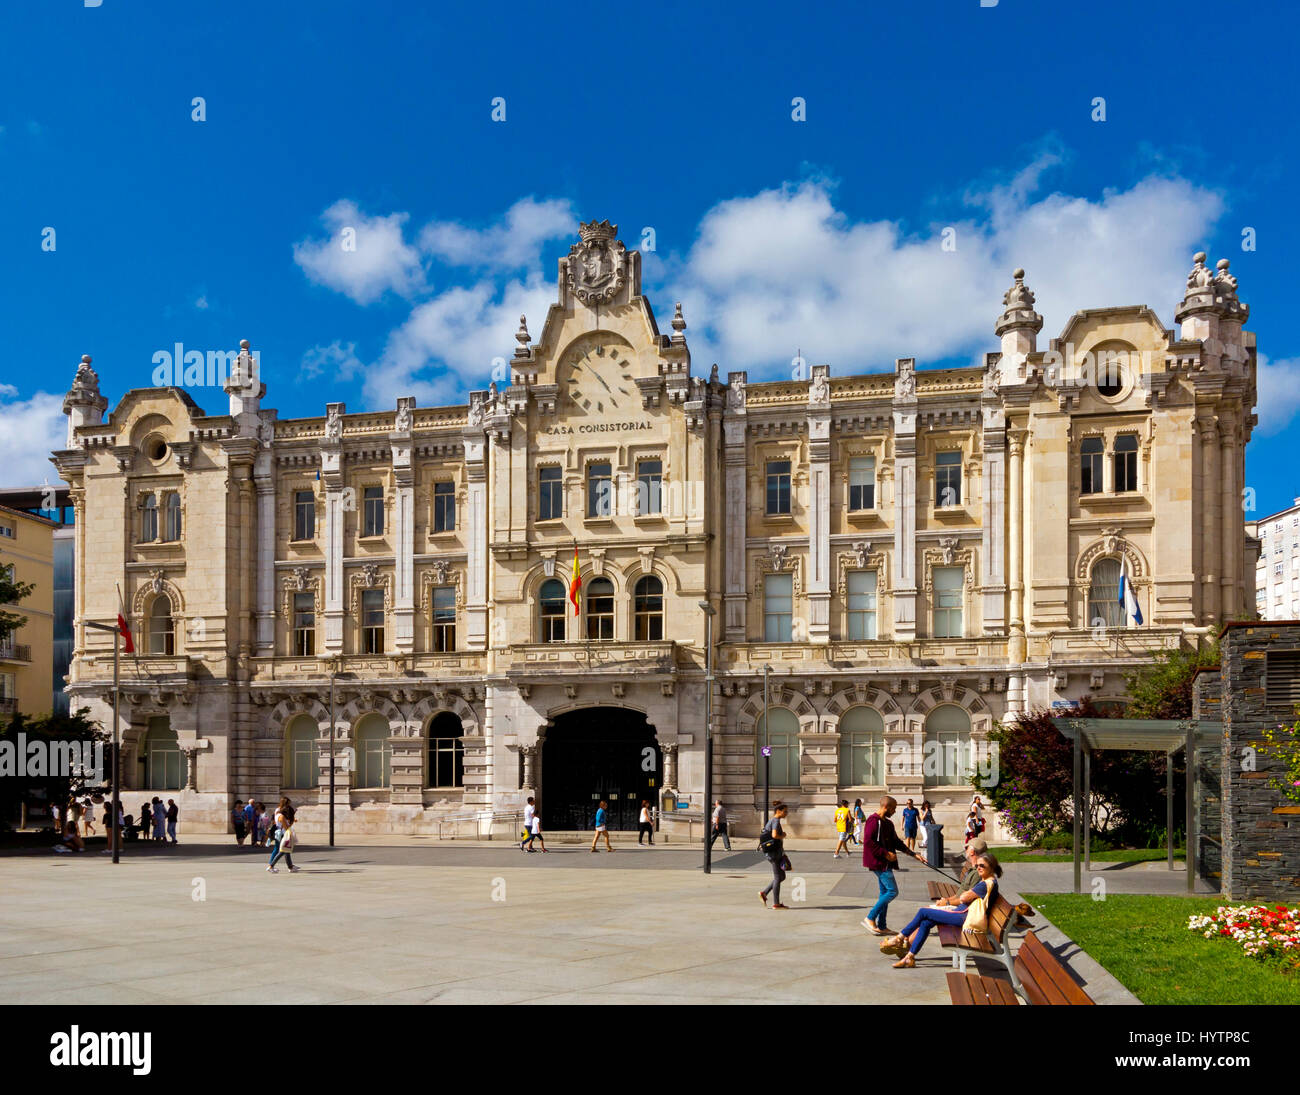 Casa Consistorial or Town Hall building in Santander Cantabria Northern Spain Stock Photo